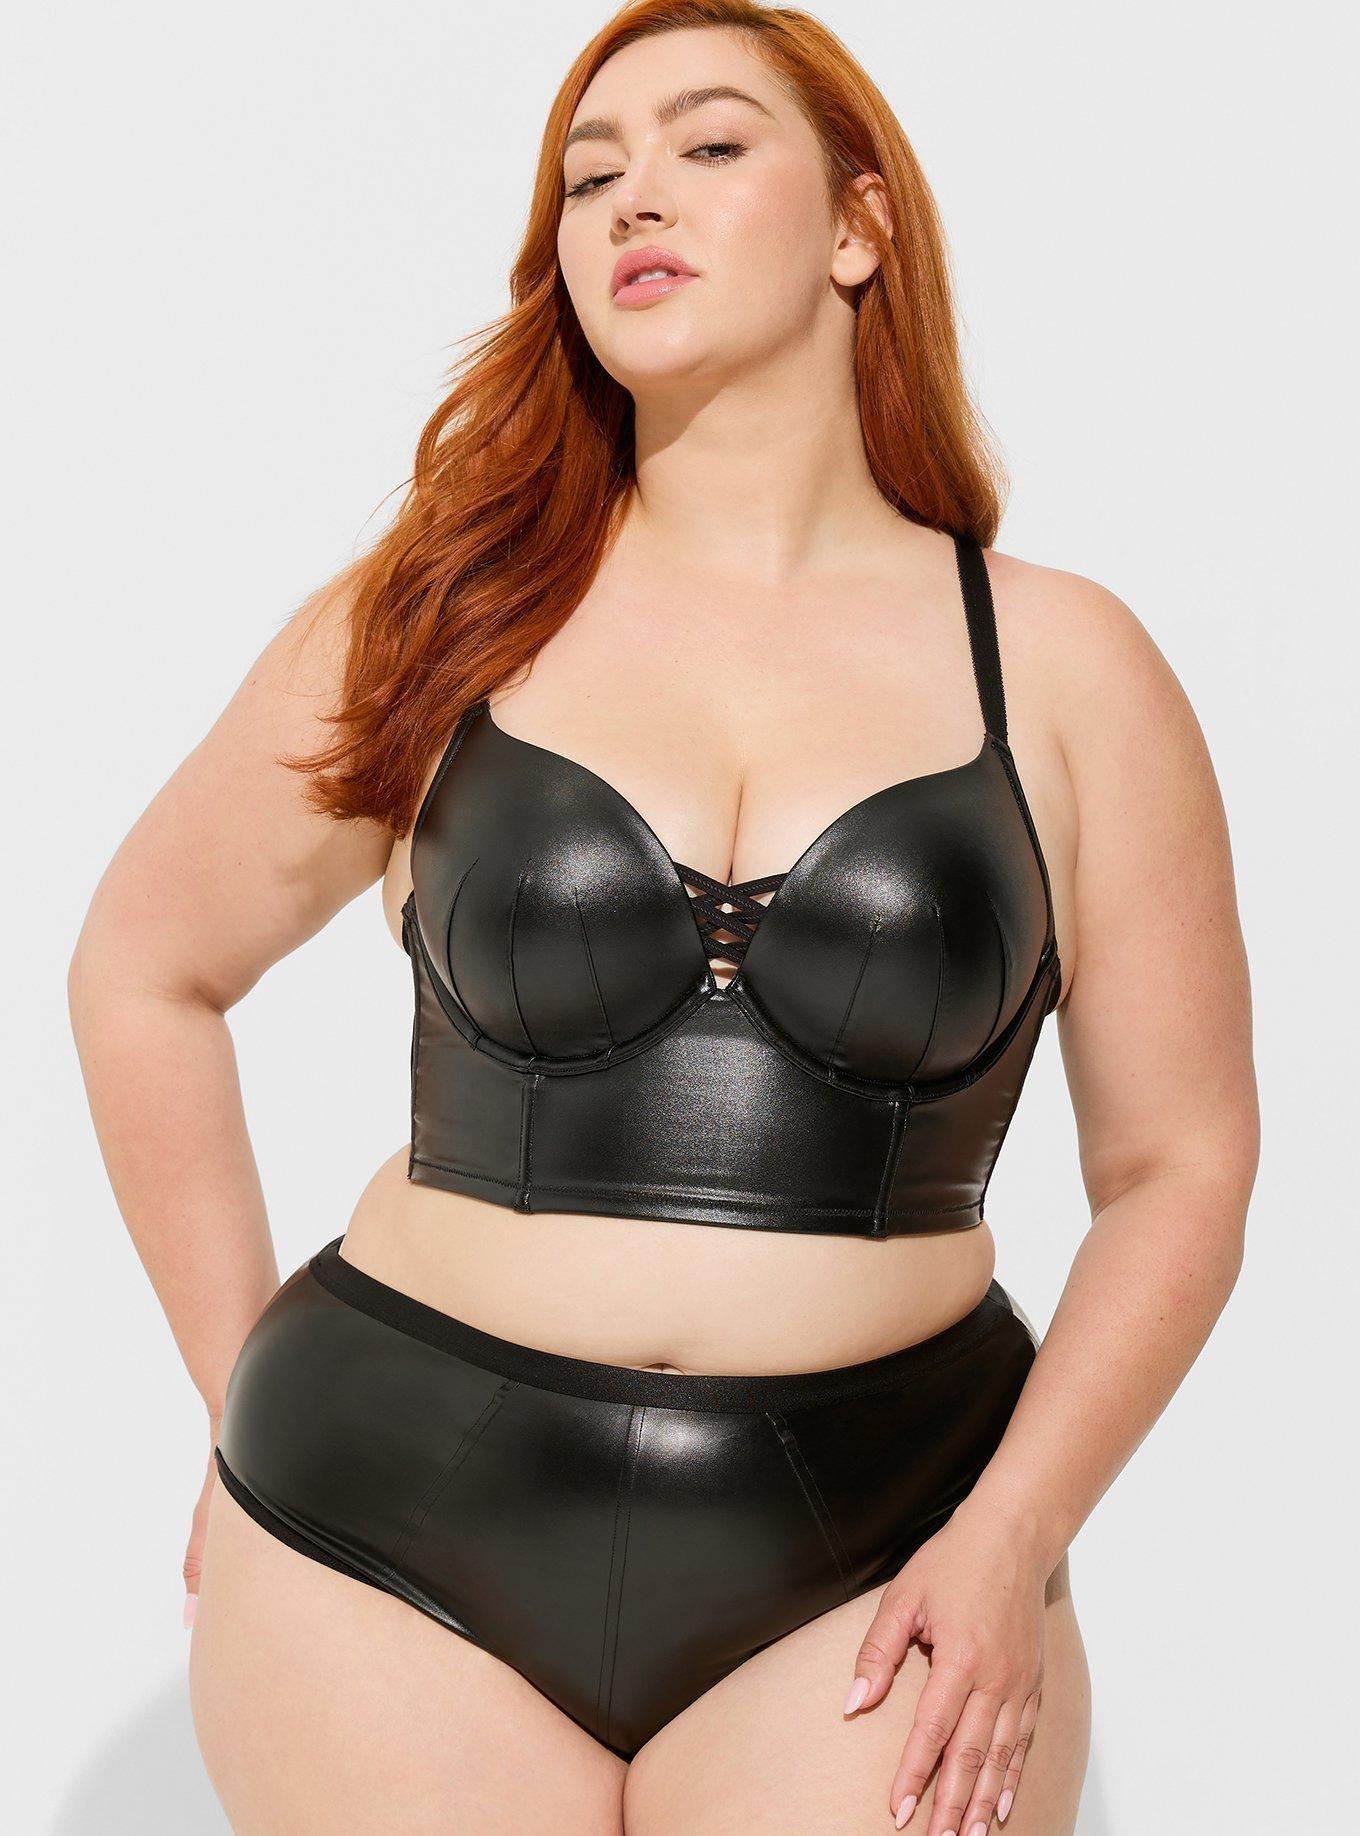 Torrid Plunge Push-Up Smooth 360° Back Smoothing™ Bra 44DD Black Micro  stars Size undefined - $25 - From April